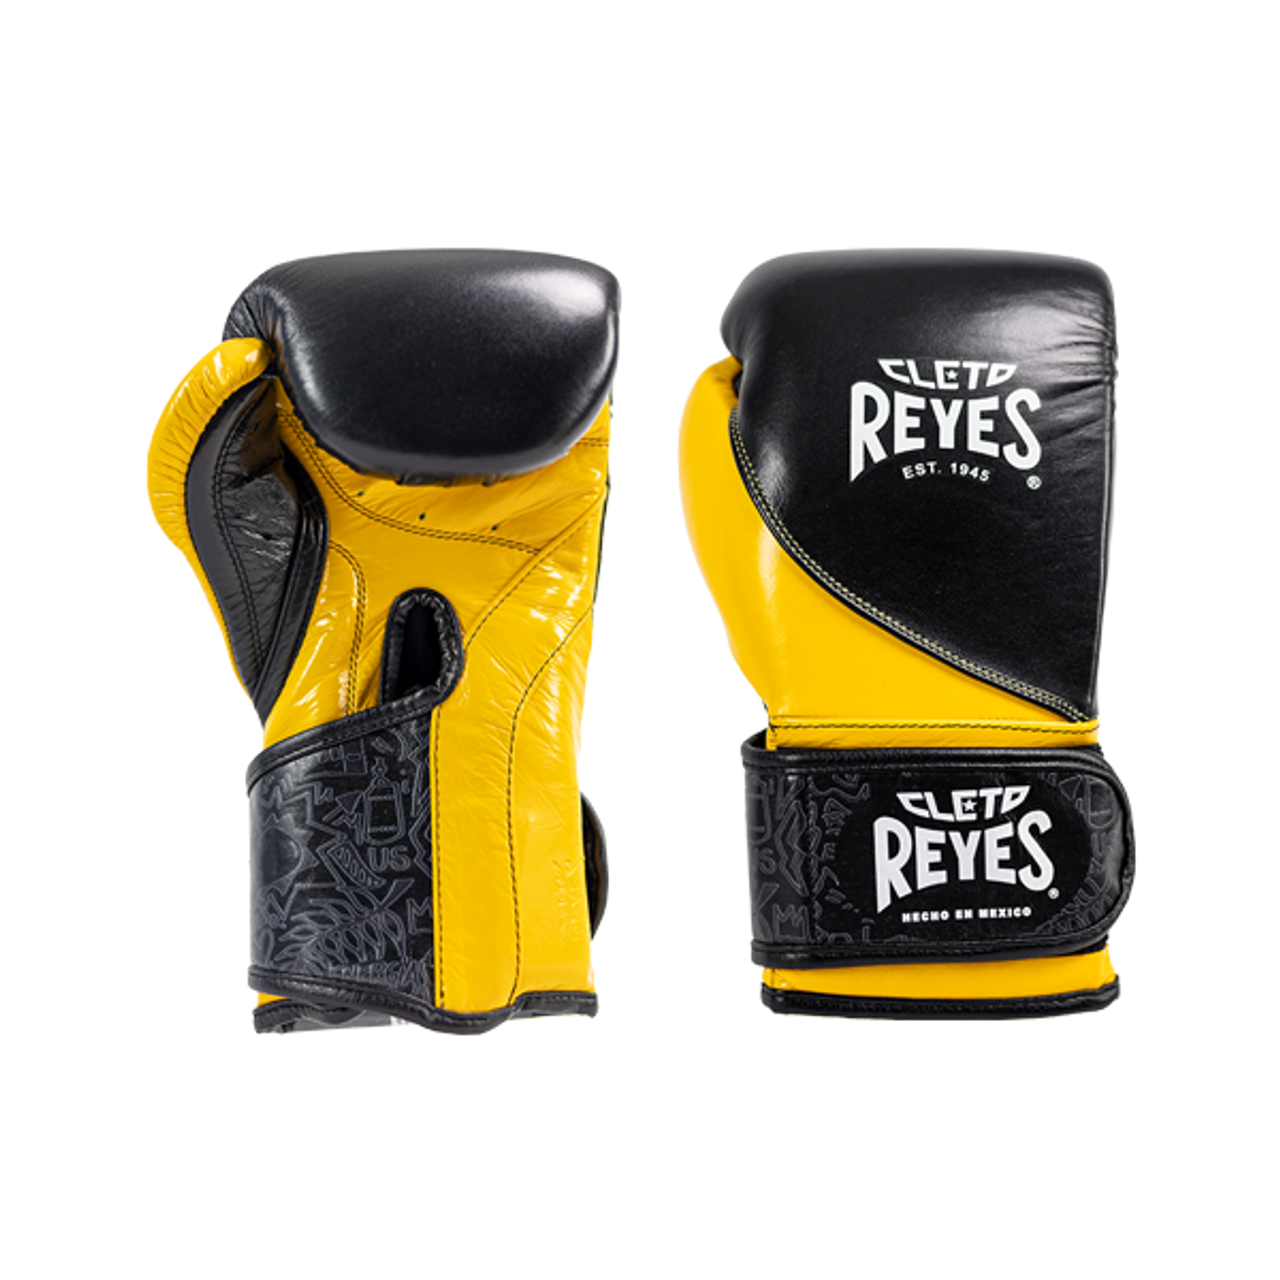 A Brand New Pair Of CLETO REYES BOXING GLOVES - HAVE THEY IMPROVED? 